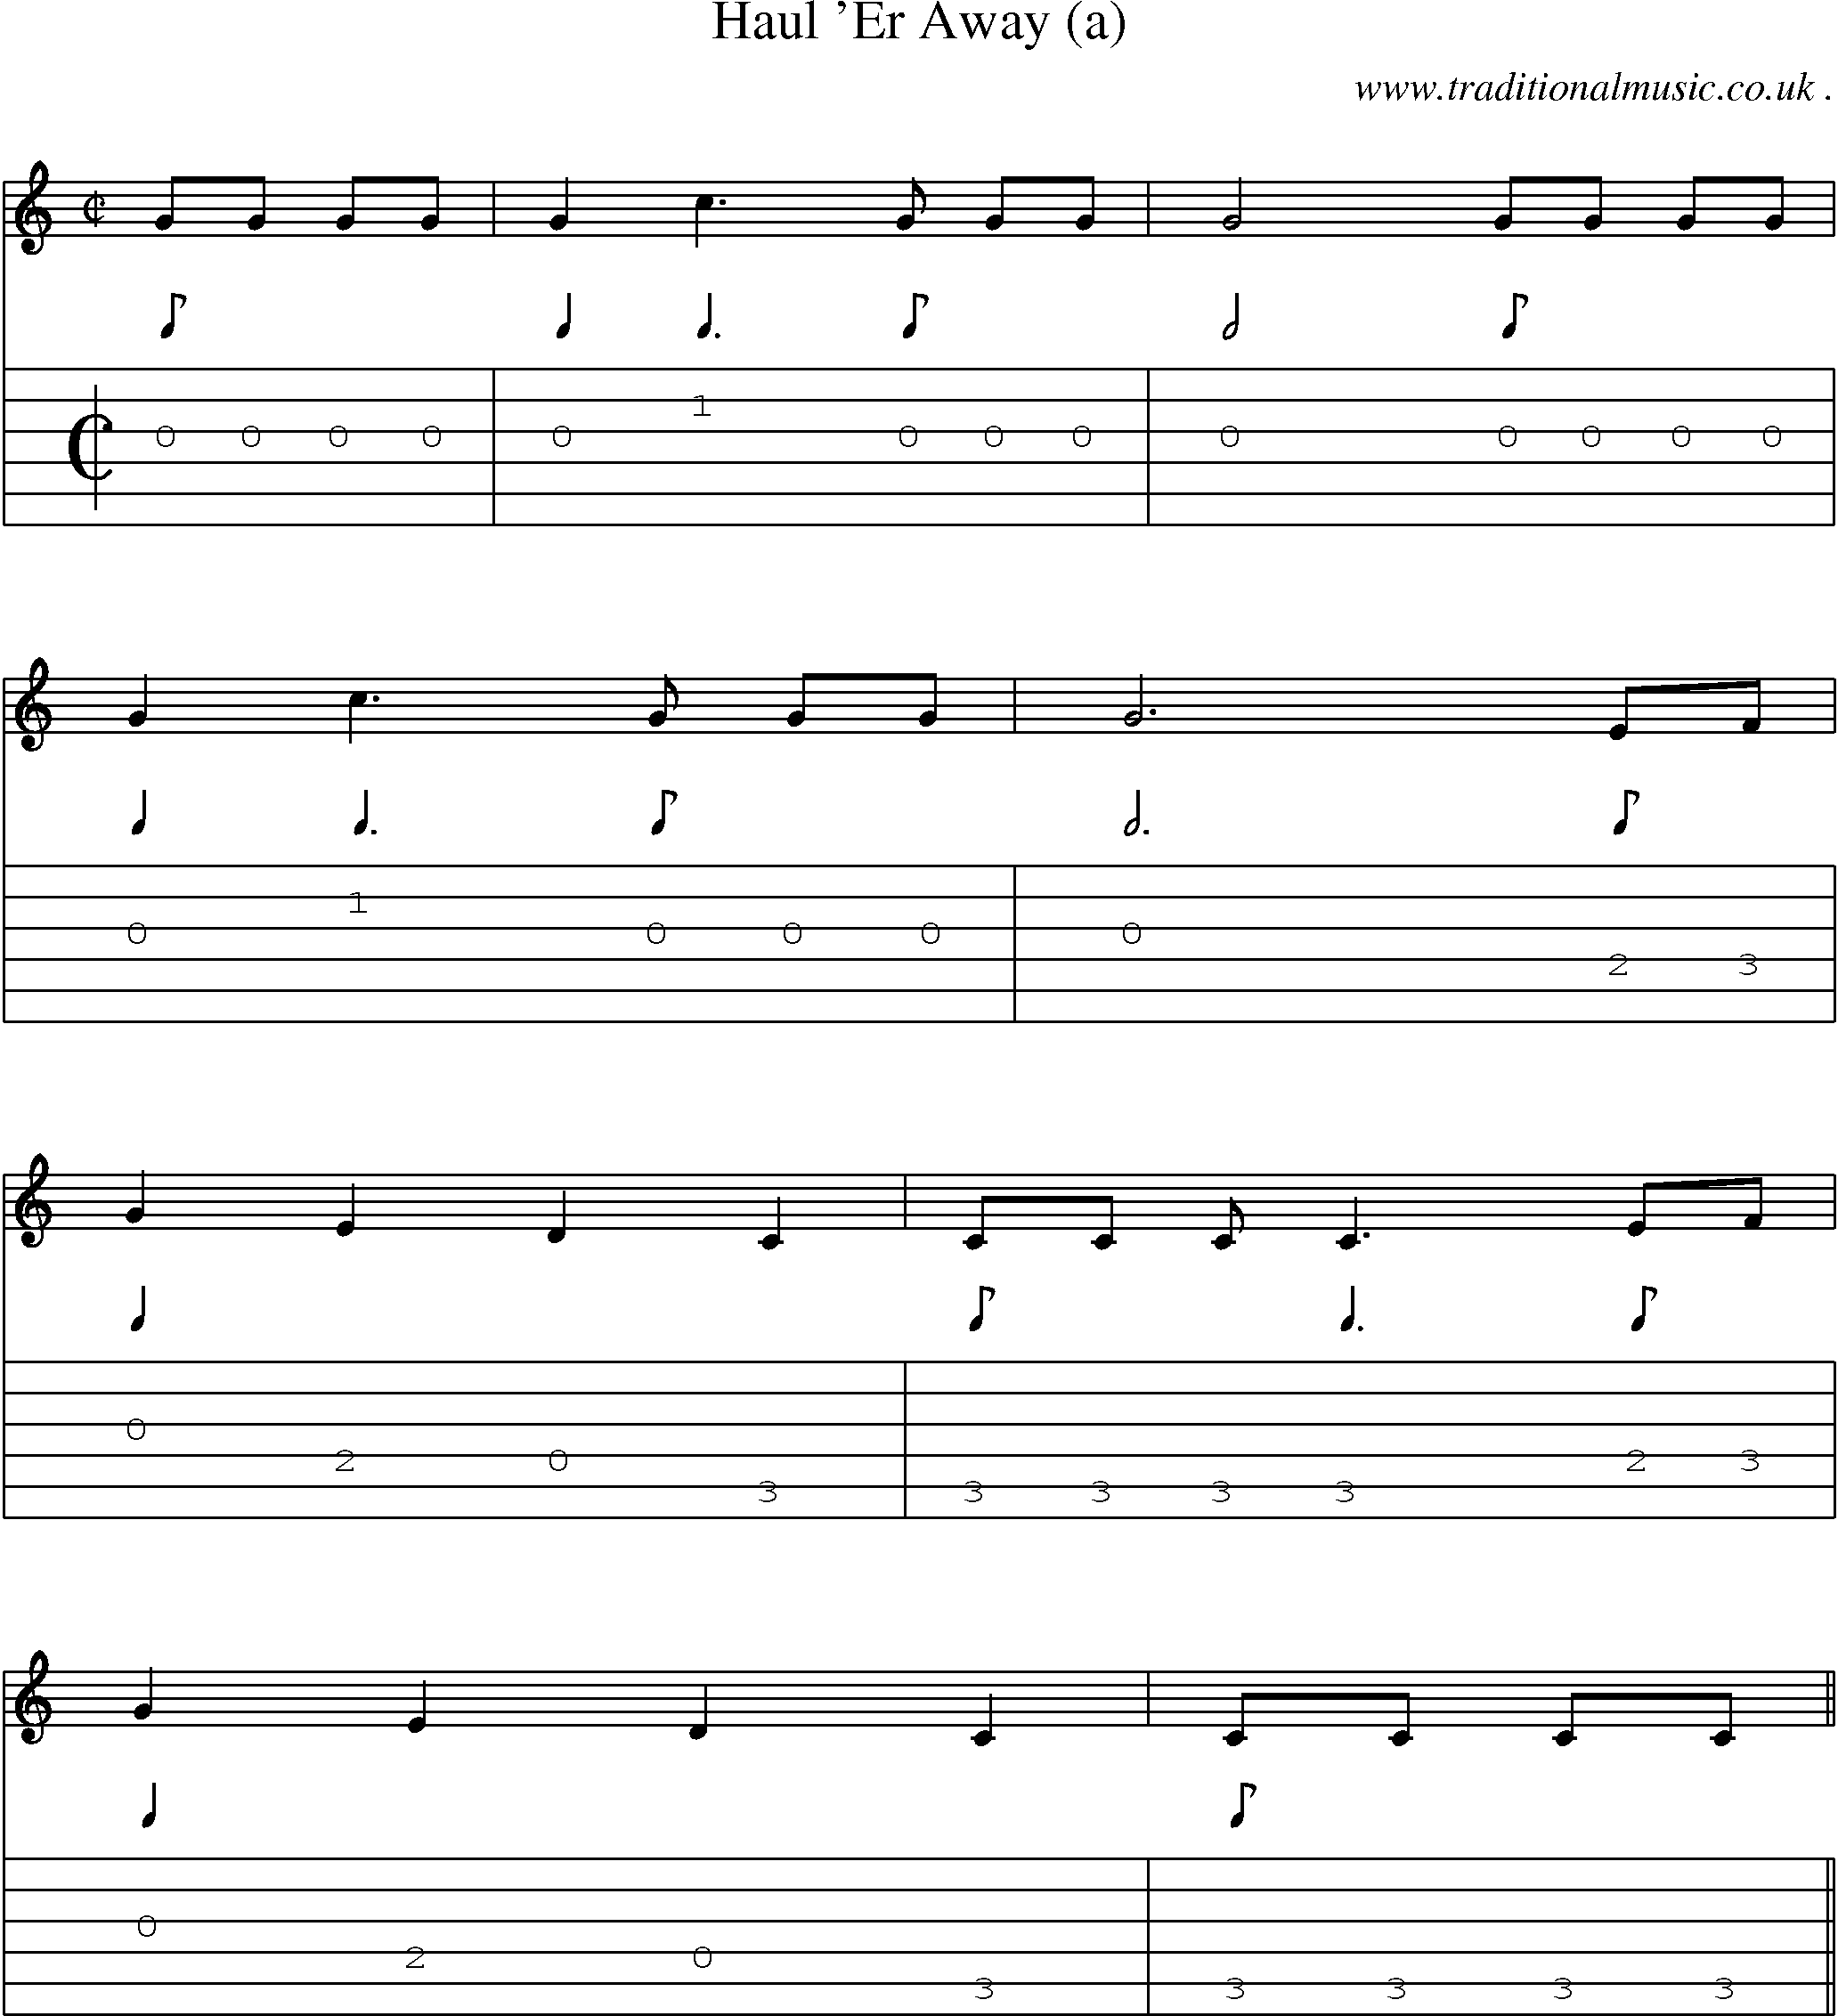 Sheet-Music and Guitar Tabs for Haul Er Away (a)